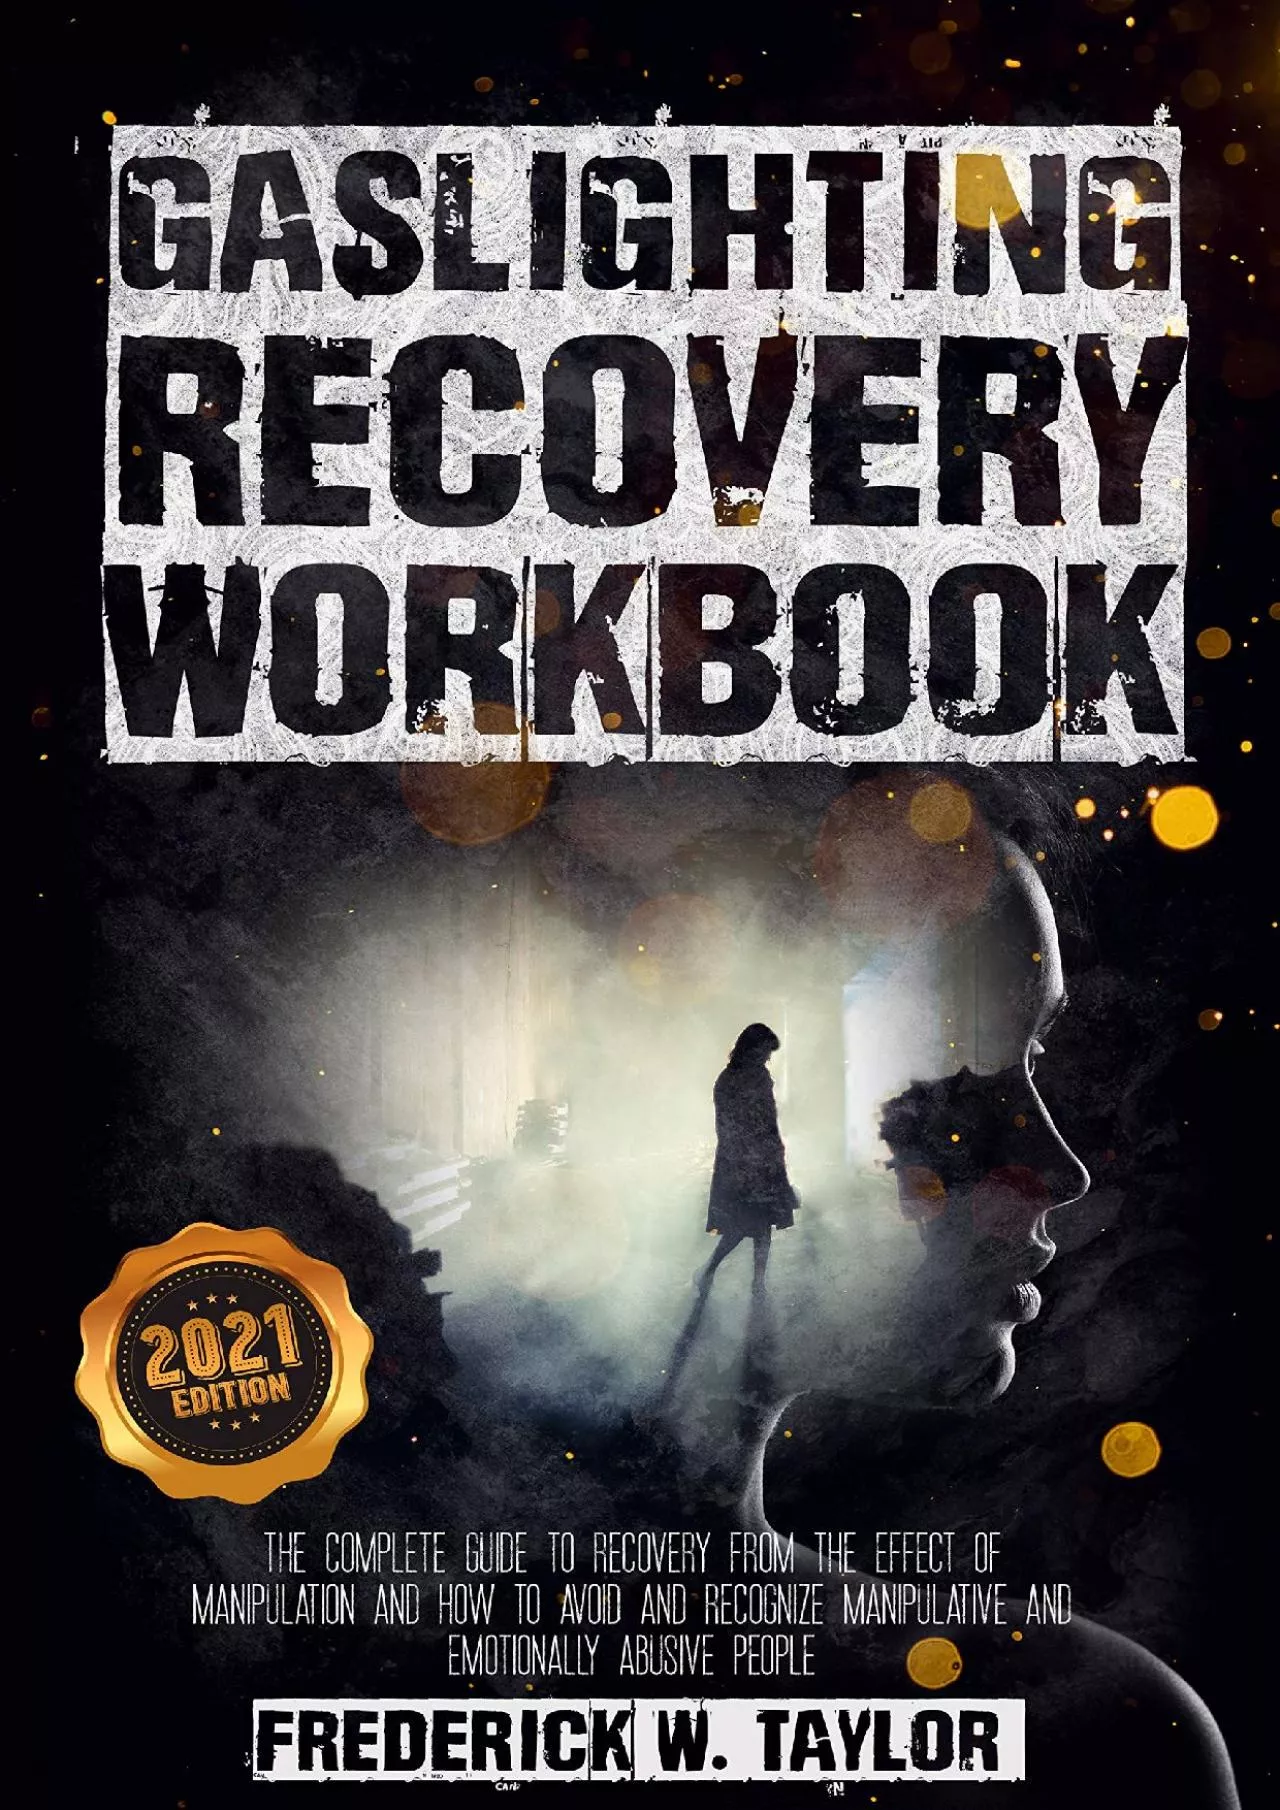 [EBOOK] Gaslighting Recovery Workbook: The Complete Guide to Recovery from the Effect